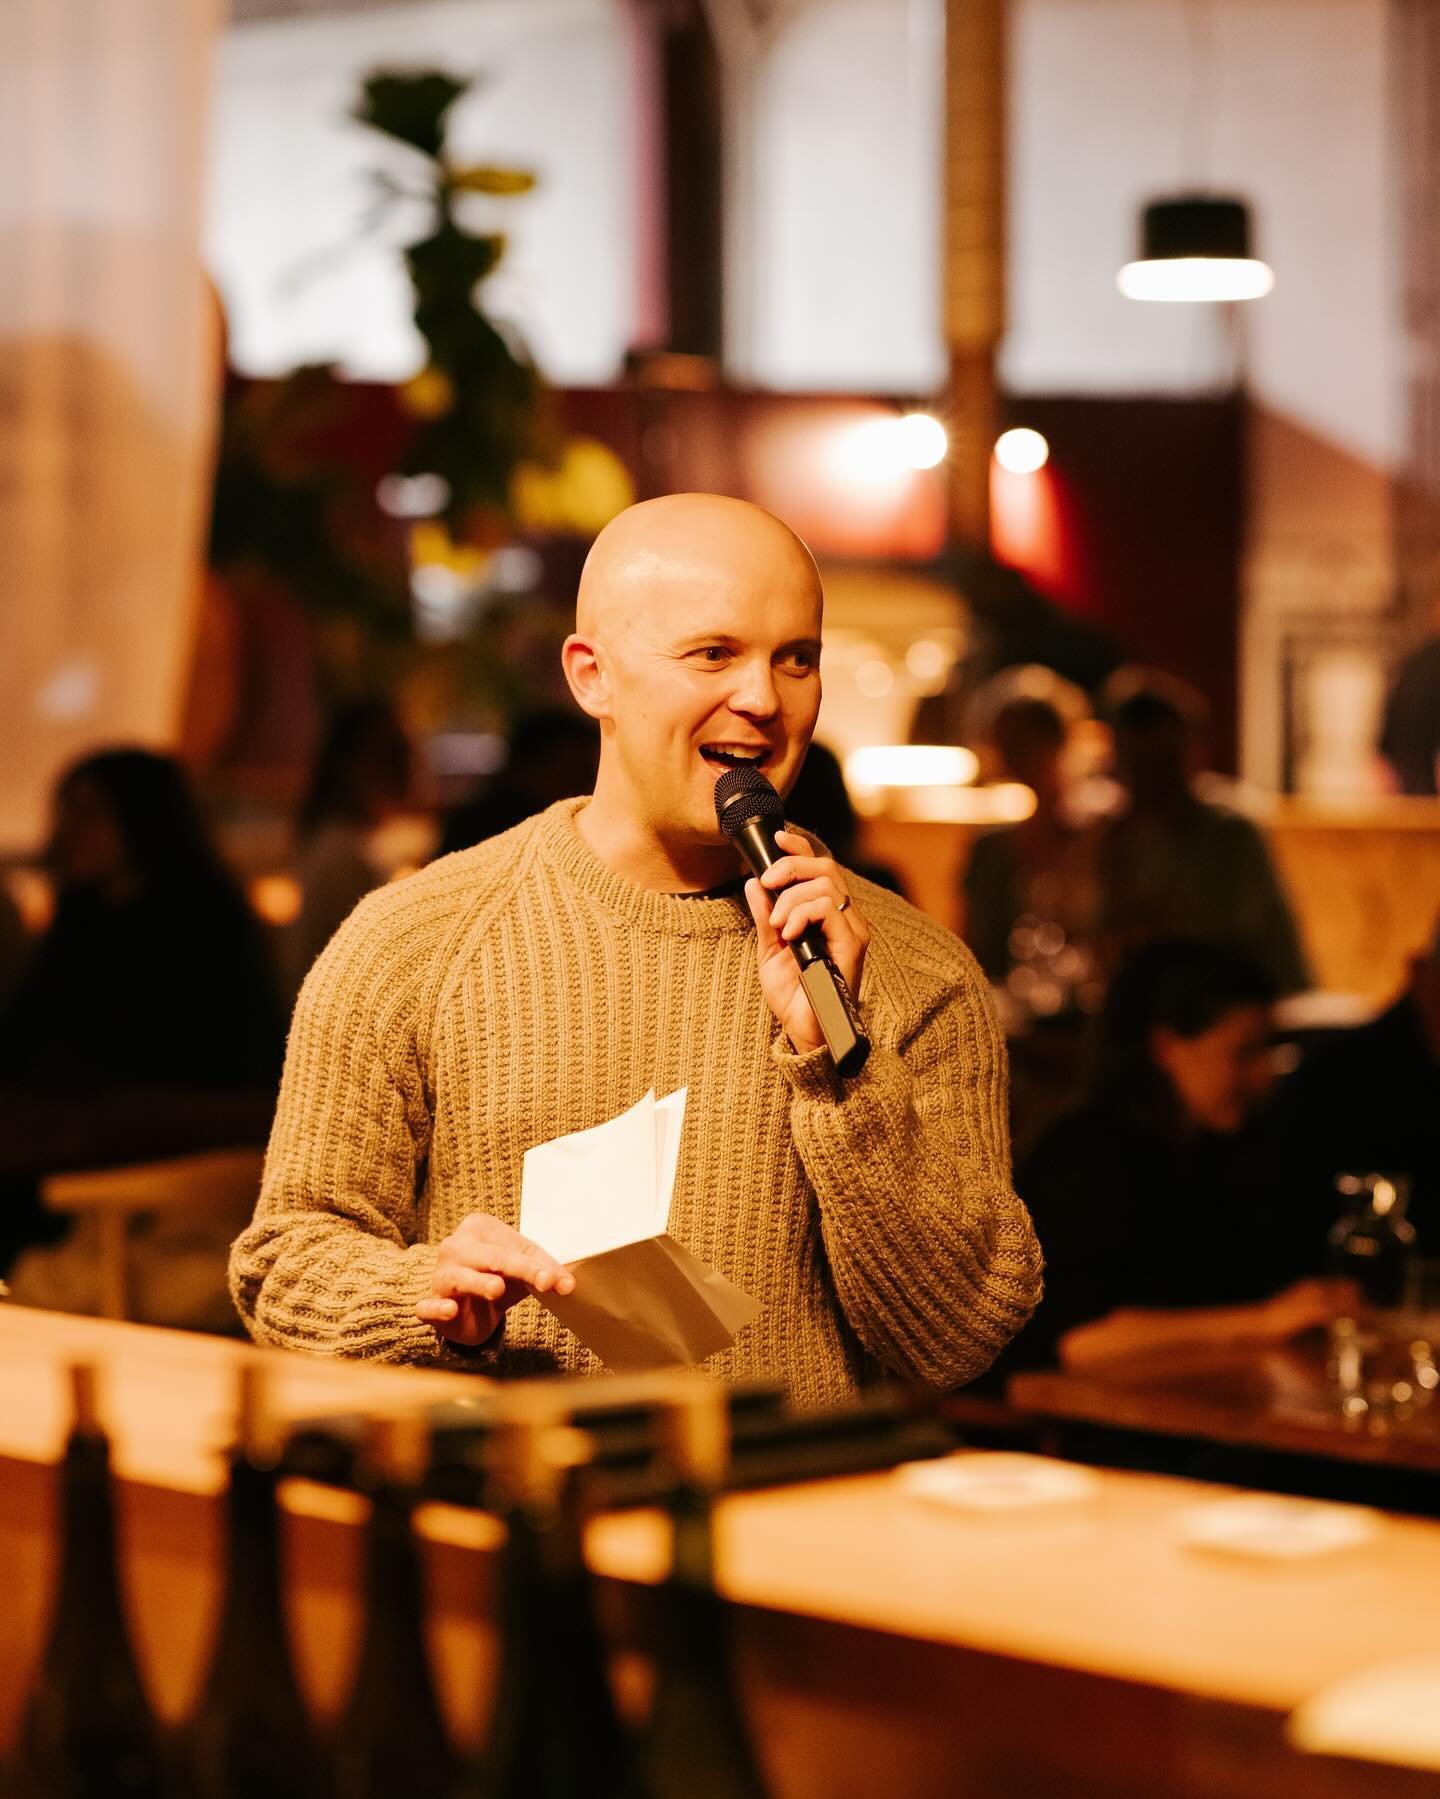 Trivia at Jamsheed with the one and only @lukebellecreative, every Thursday! $100 bar tab for the winner and $50 food voucher for second place! Not to mention drink specials all night plus $25 bistro meals. What a time! ✨
📸 @andrewclarkphoto